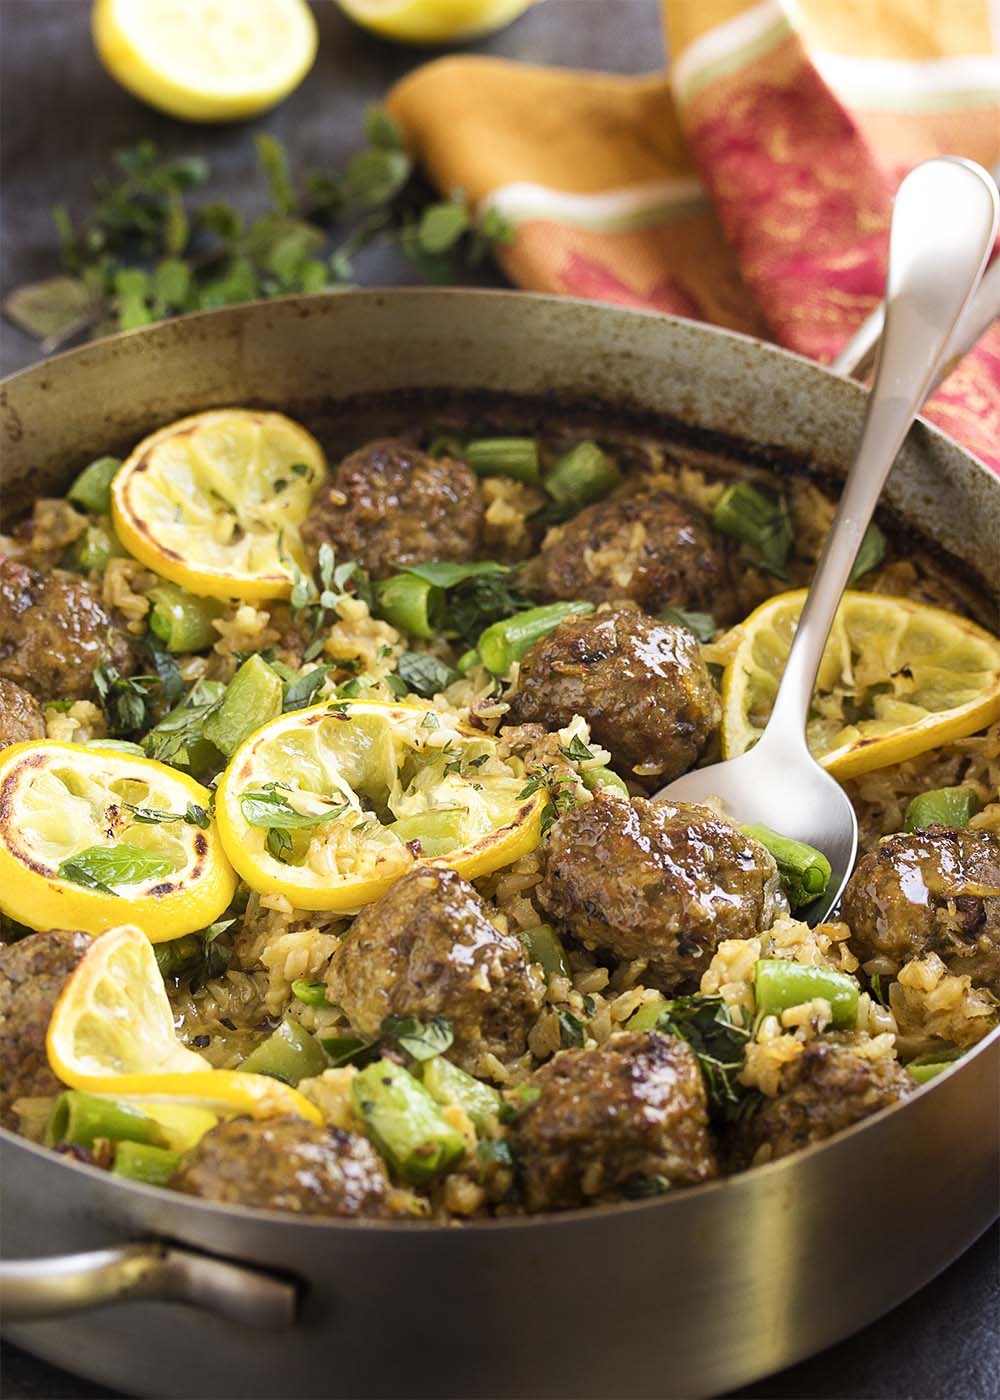 Great and easy one pot meal which starts on the stove and finishes in the oven! Greek lamb meatballs and brown rice is a healthy, complete meal full of the flavors of mint and thyme and finished with a crumble of feta. | justalittlebitofbacon.com